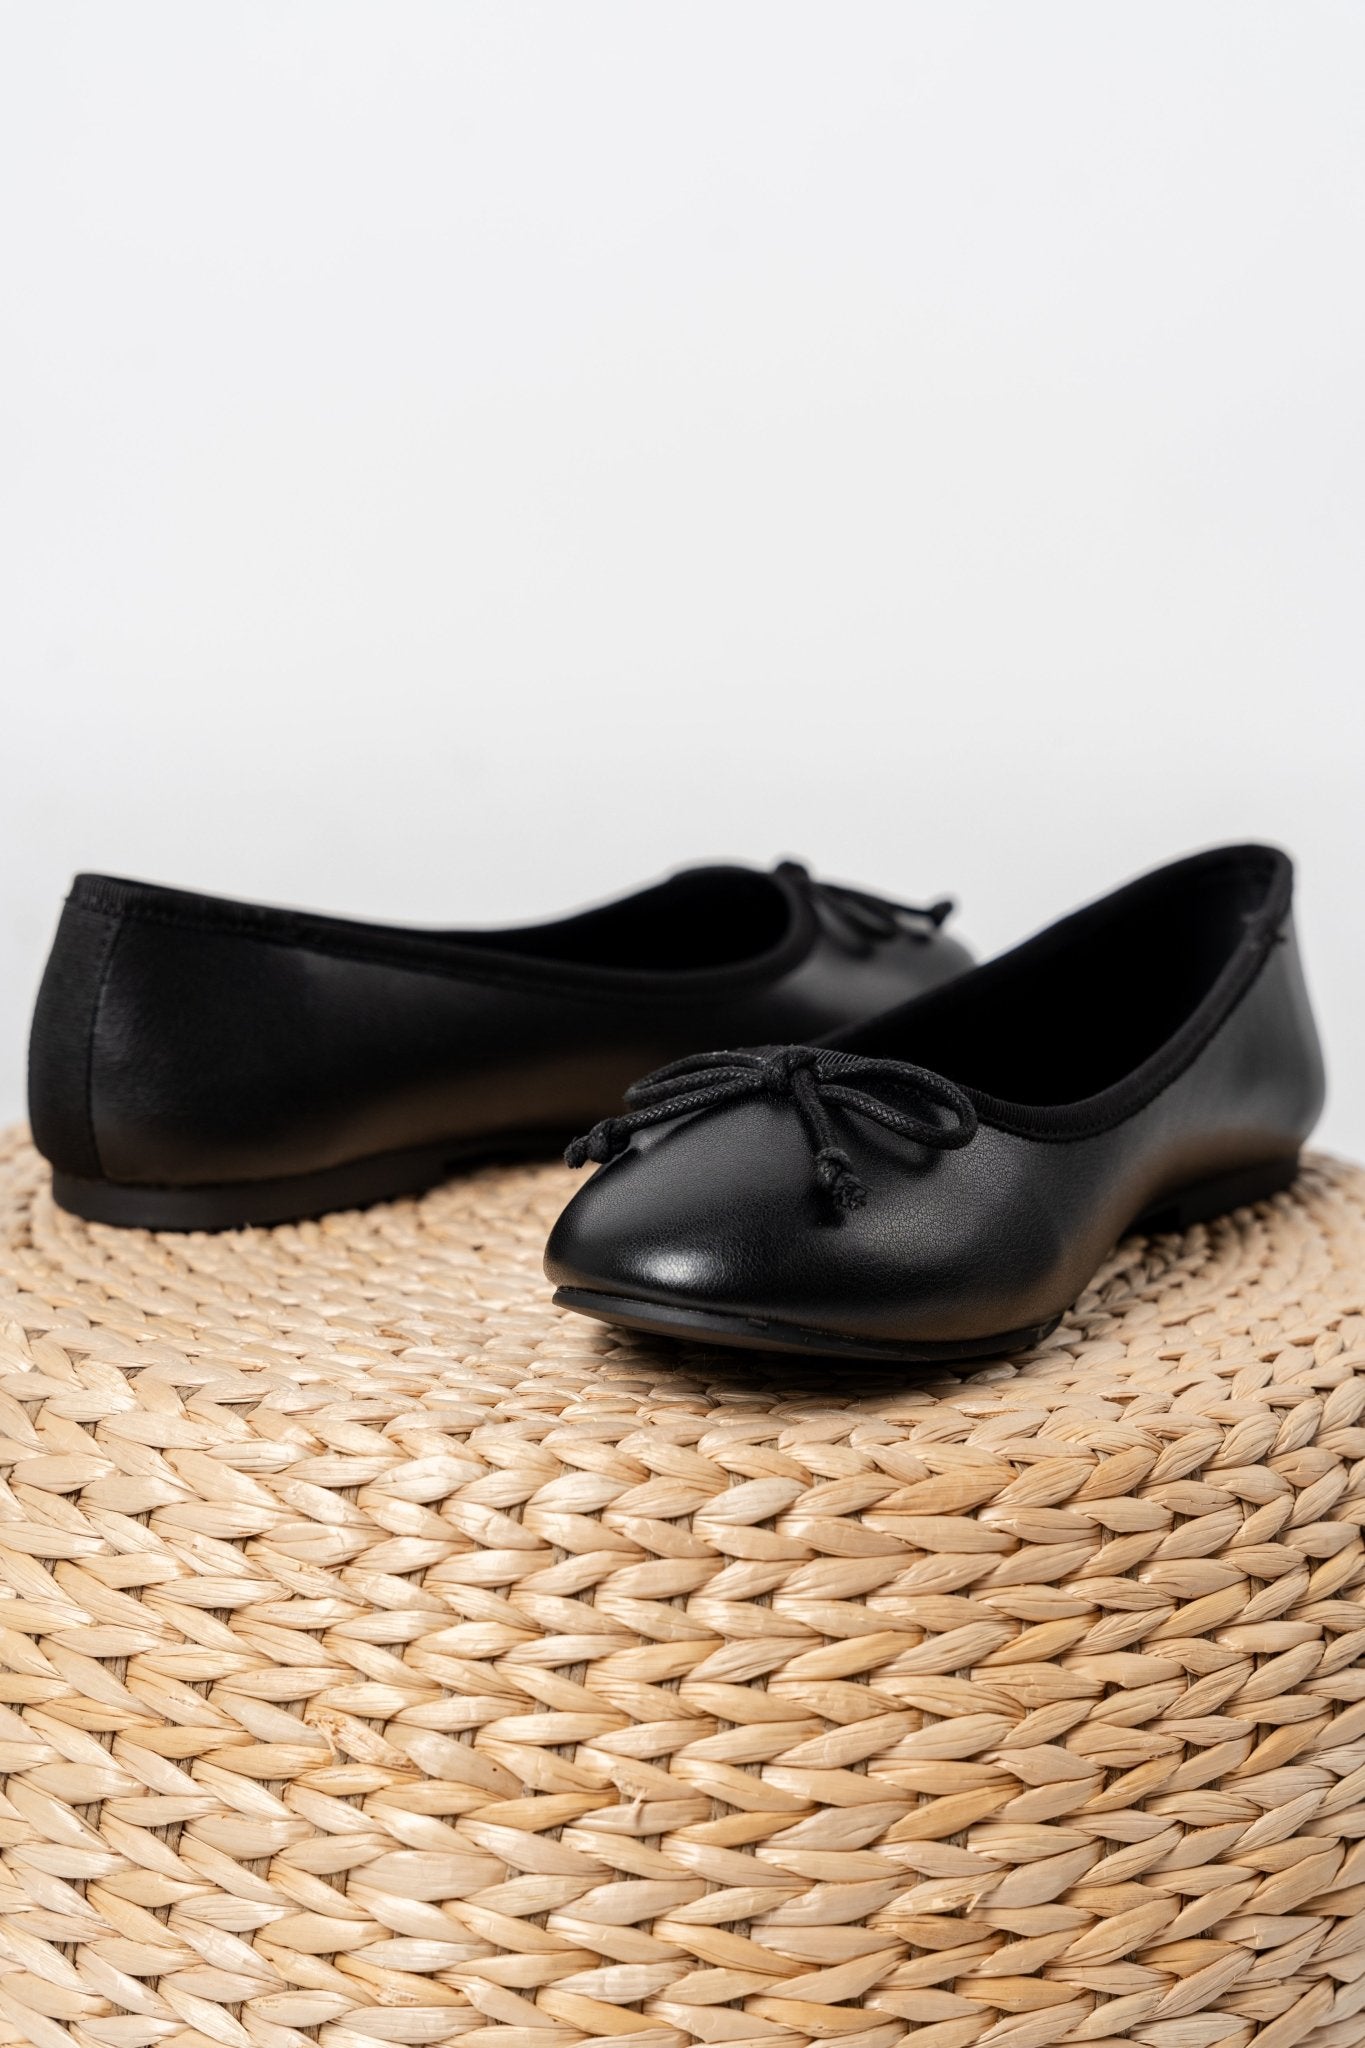 Jobin ballet flat black - Cute shoes - Trendy Shoes at Lush Fashion Lounge Boutique in Oklahoma City